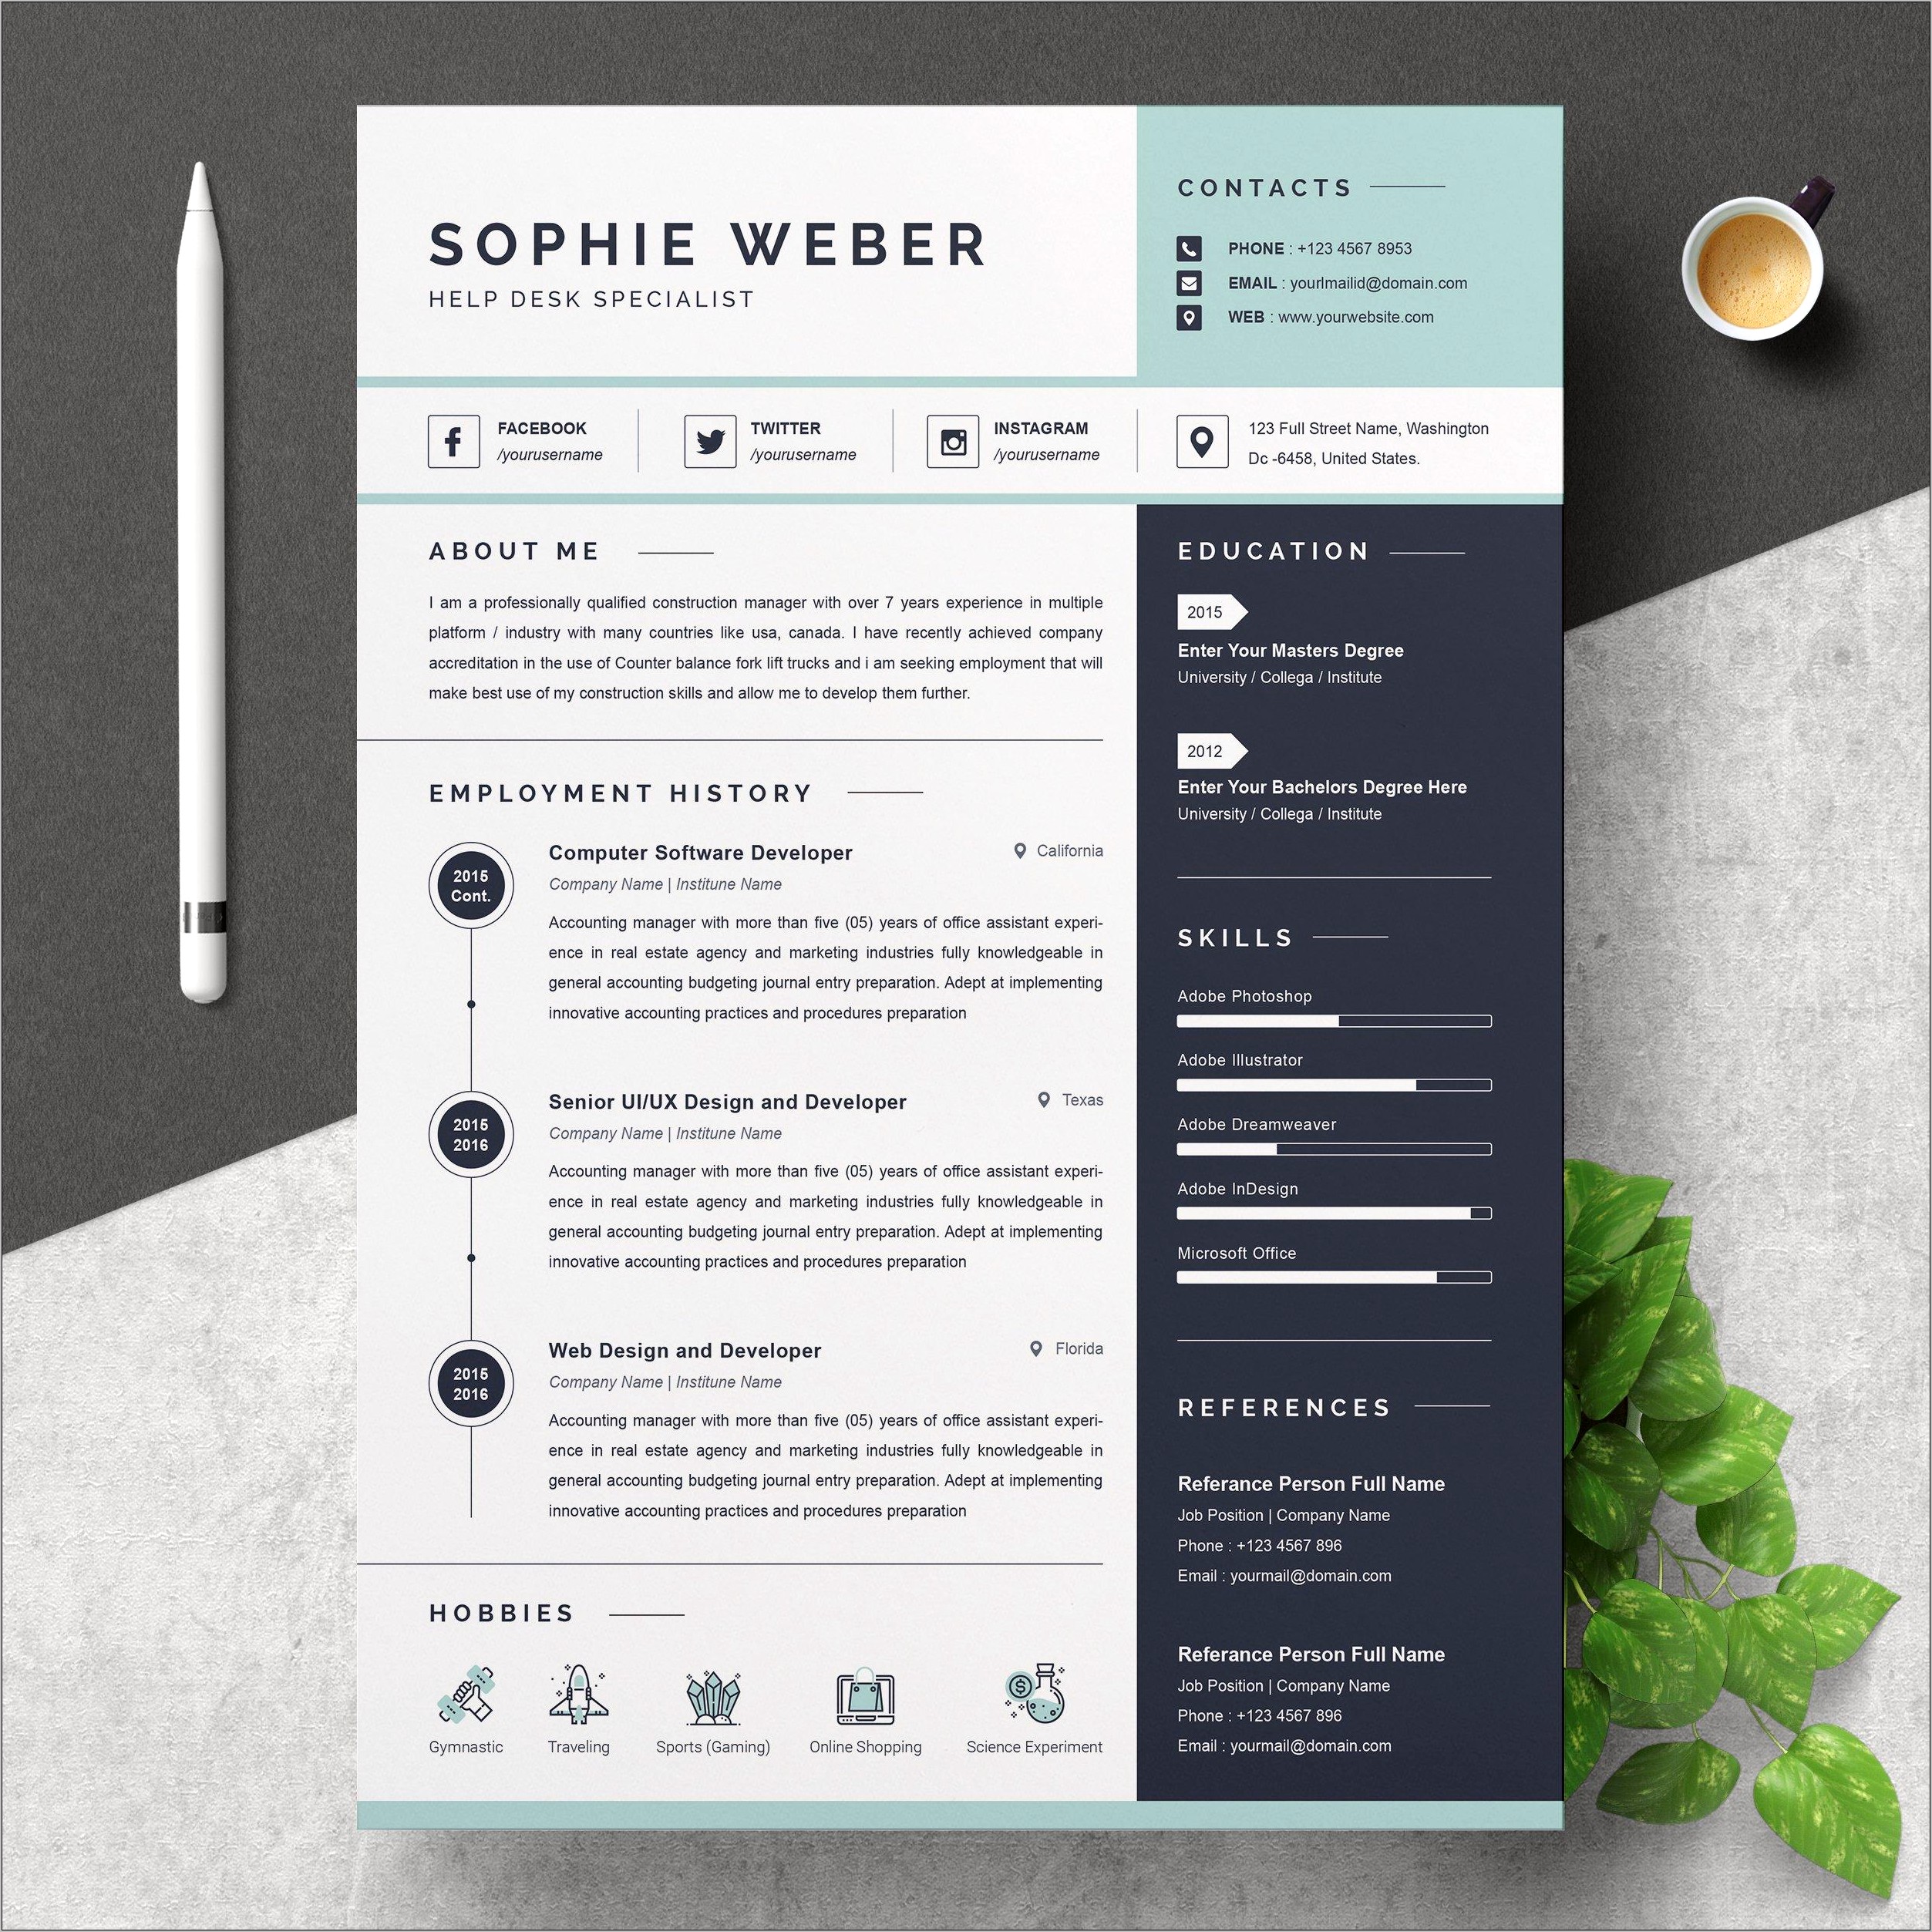 Administrative Assistant Modern Resume Templates Free Download